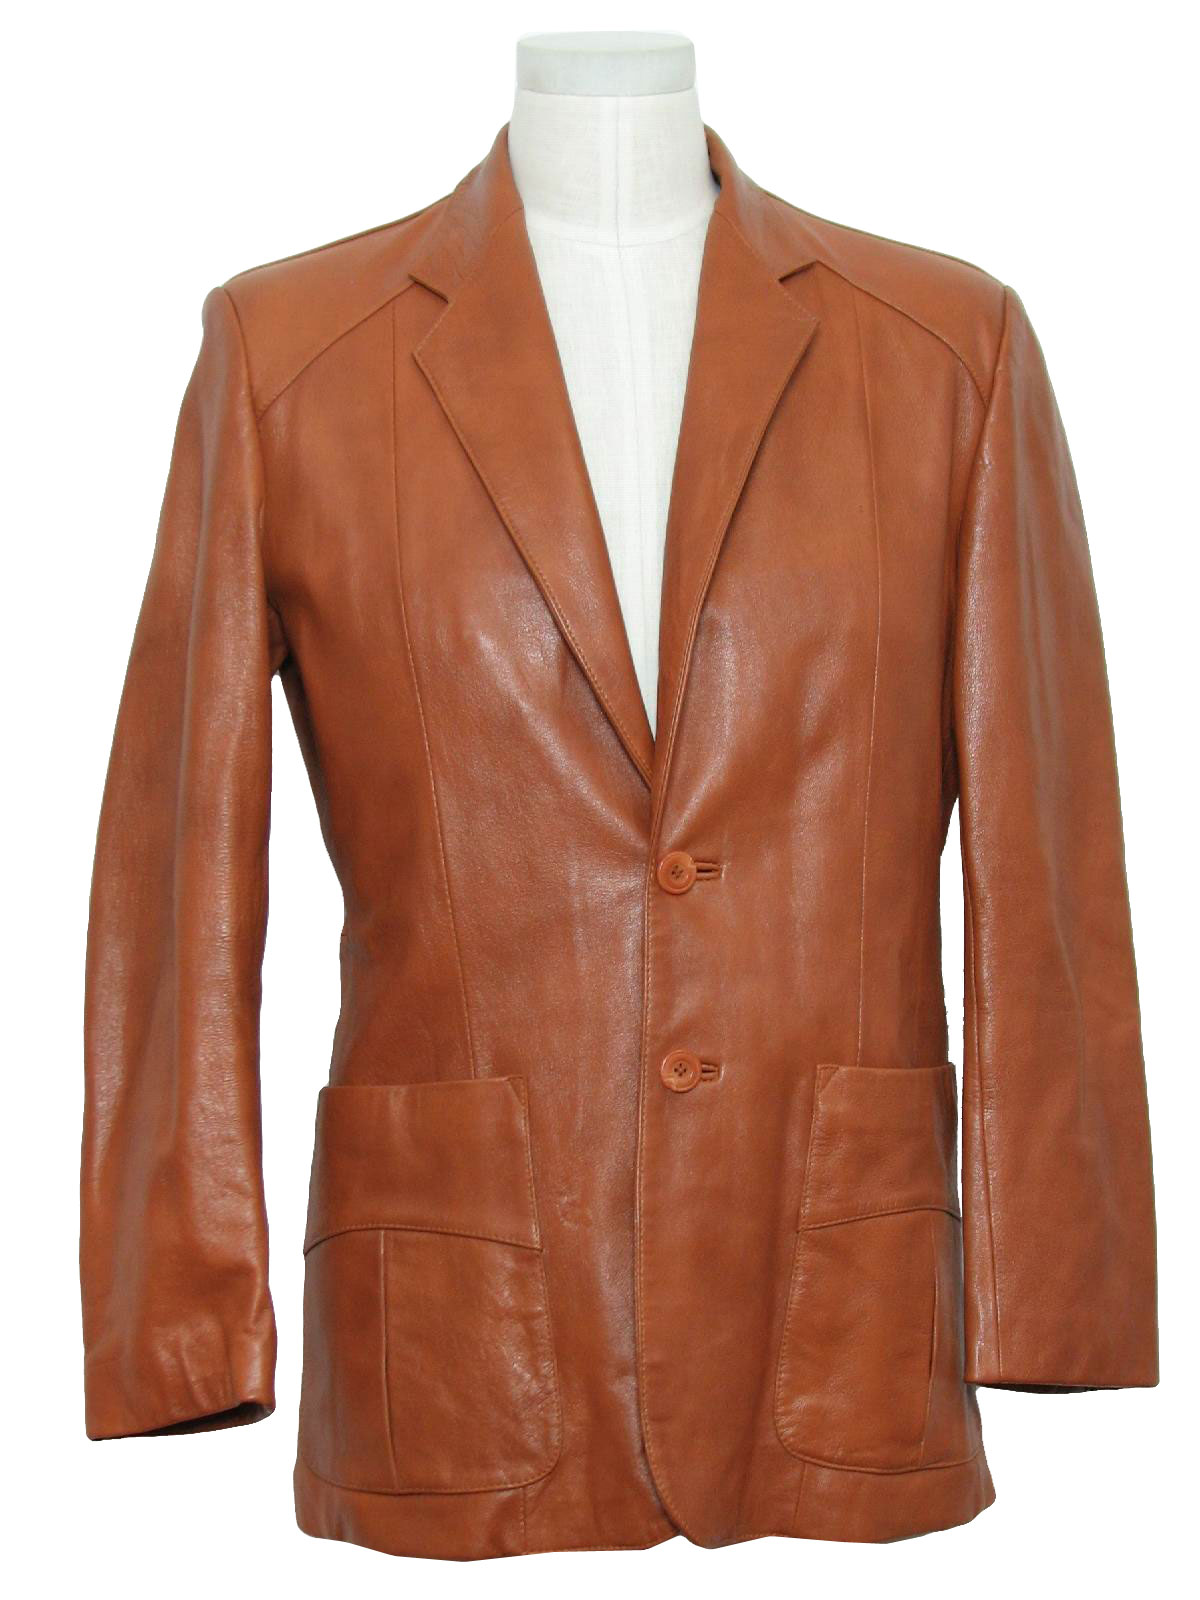 Retro Seventies Leather Jacket: Late 70s -Wilsons Leather- Mens honey ...